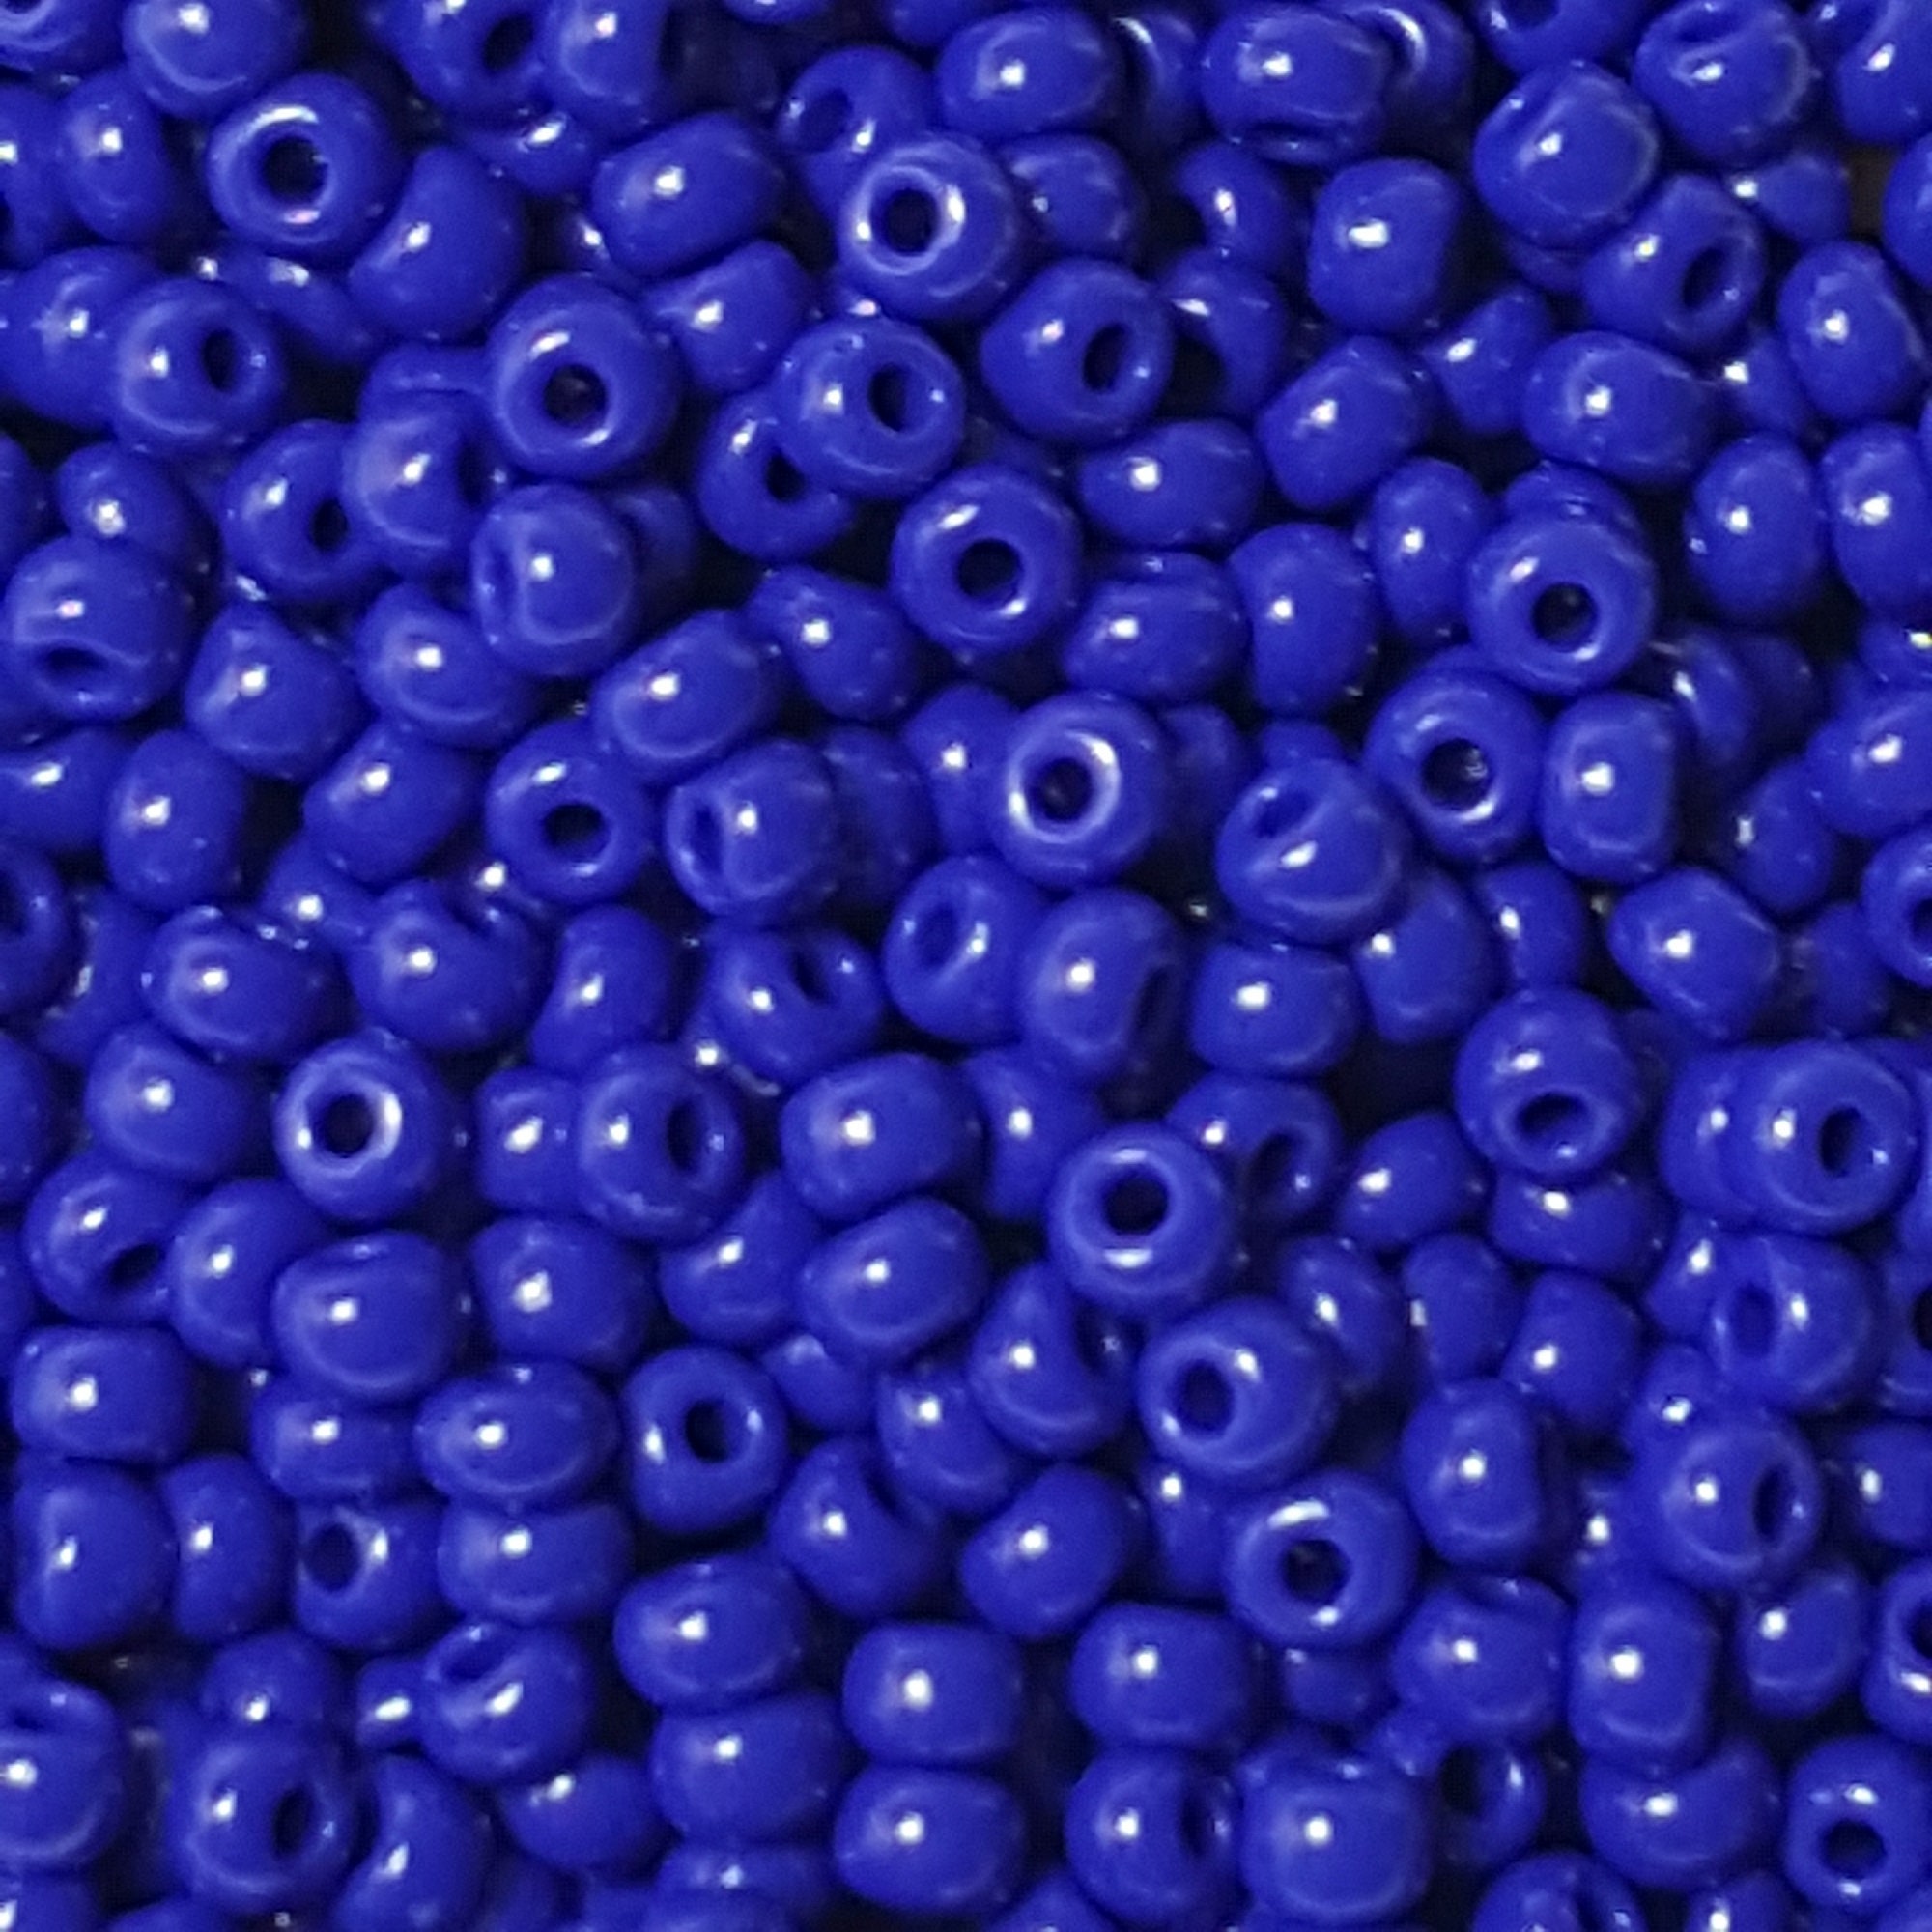 Over 1600 Frosted Sea Glass Look Seed Beads 6/0 for Jewelry Making Supplies  for Adults - Blue Colors Czech Glass Beads for Bracelets, Necklaces, Crafts  and DIY - 8 Color Bead Kit 